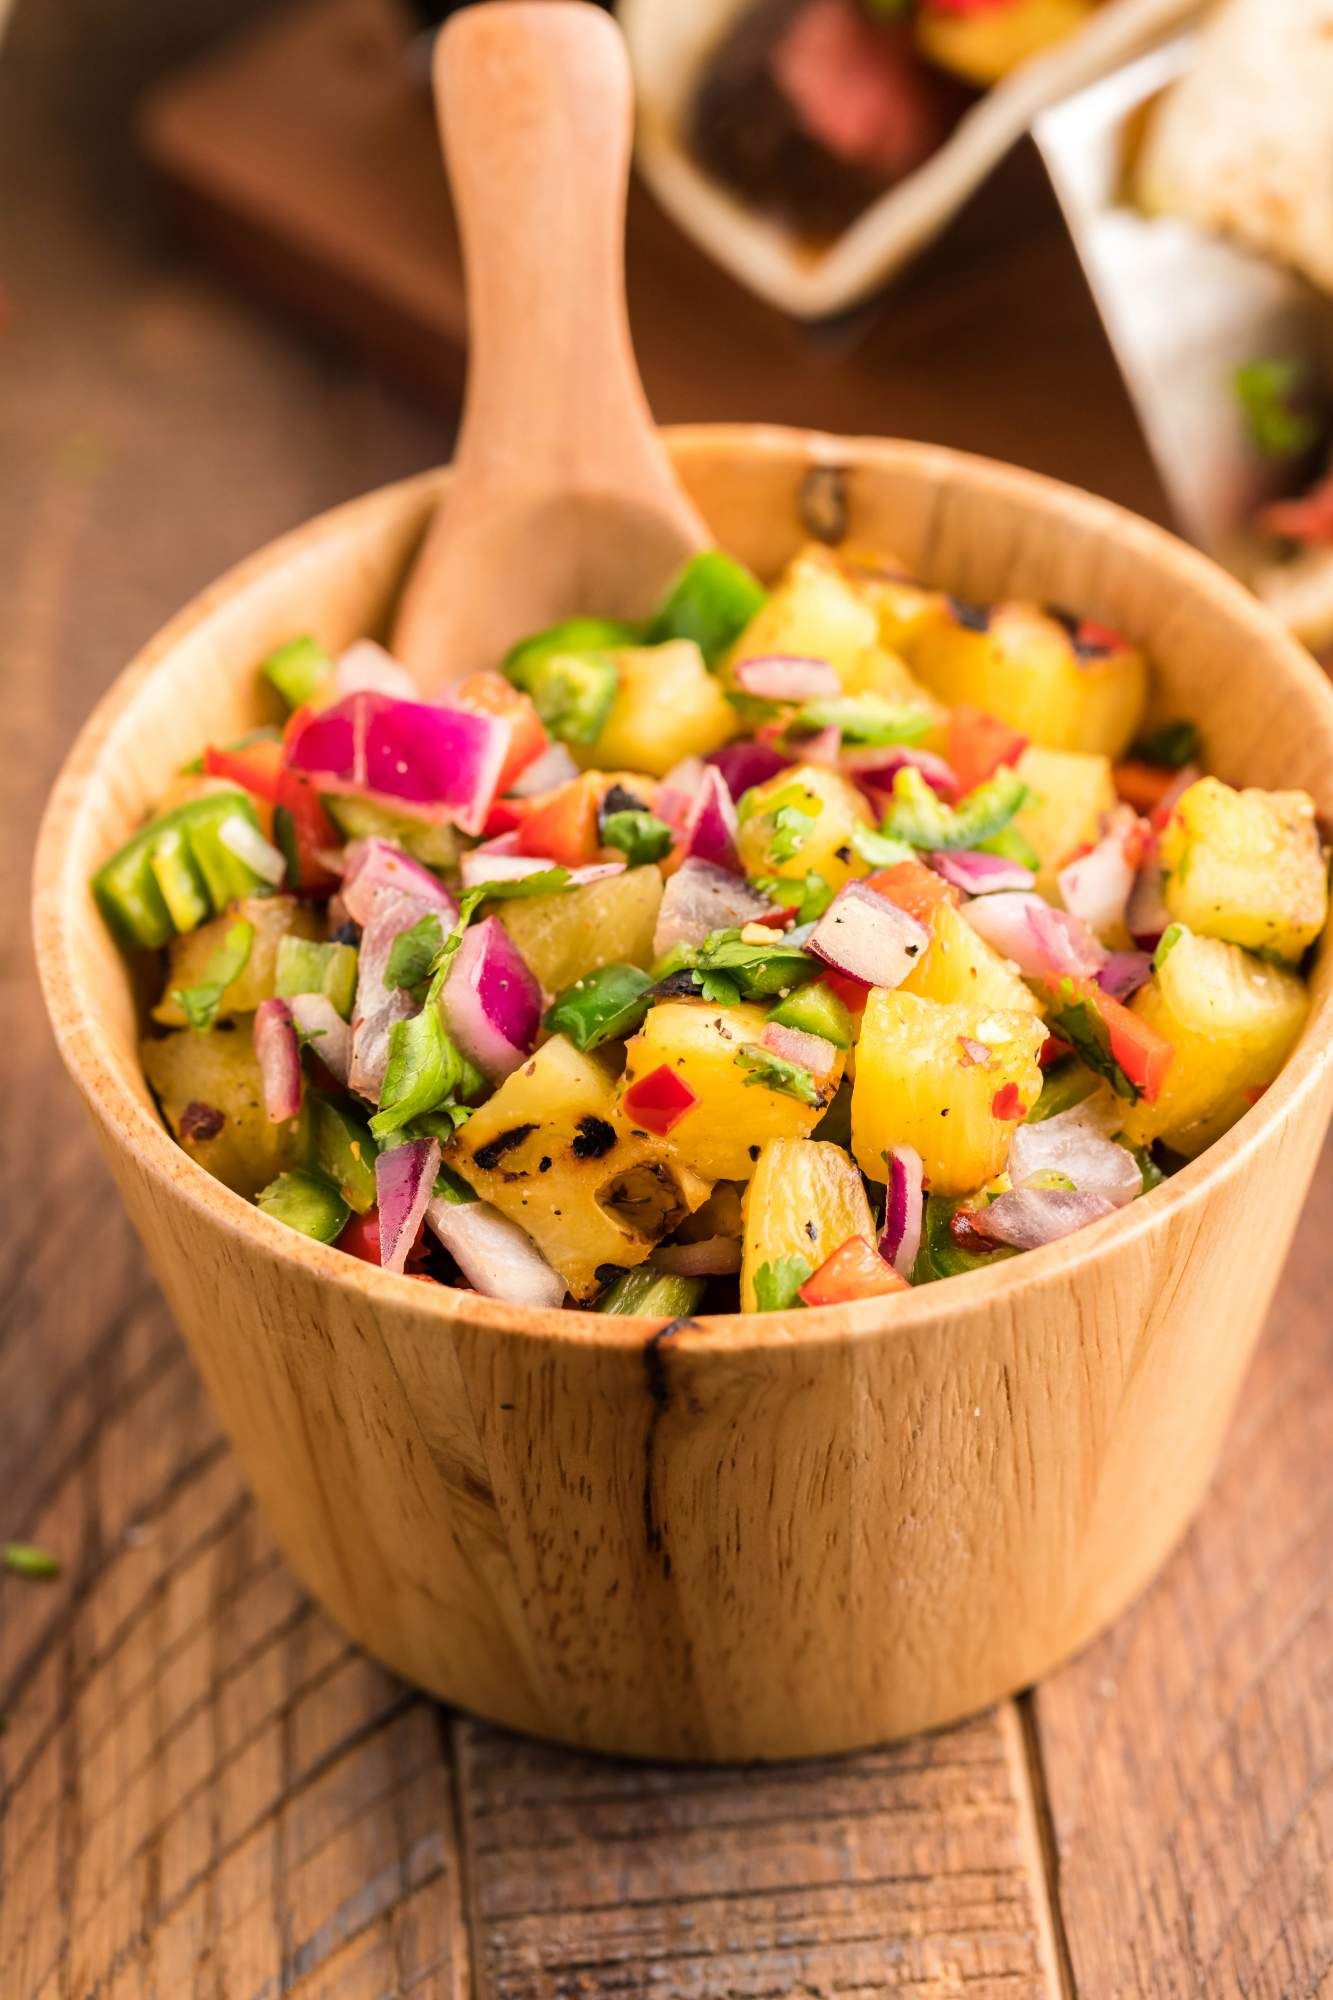 Pineapple serrano salsa with cilantro, red onion, lime juice, and grilled pineapple in a wooden bowl.